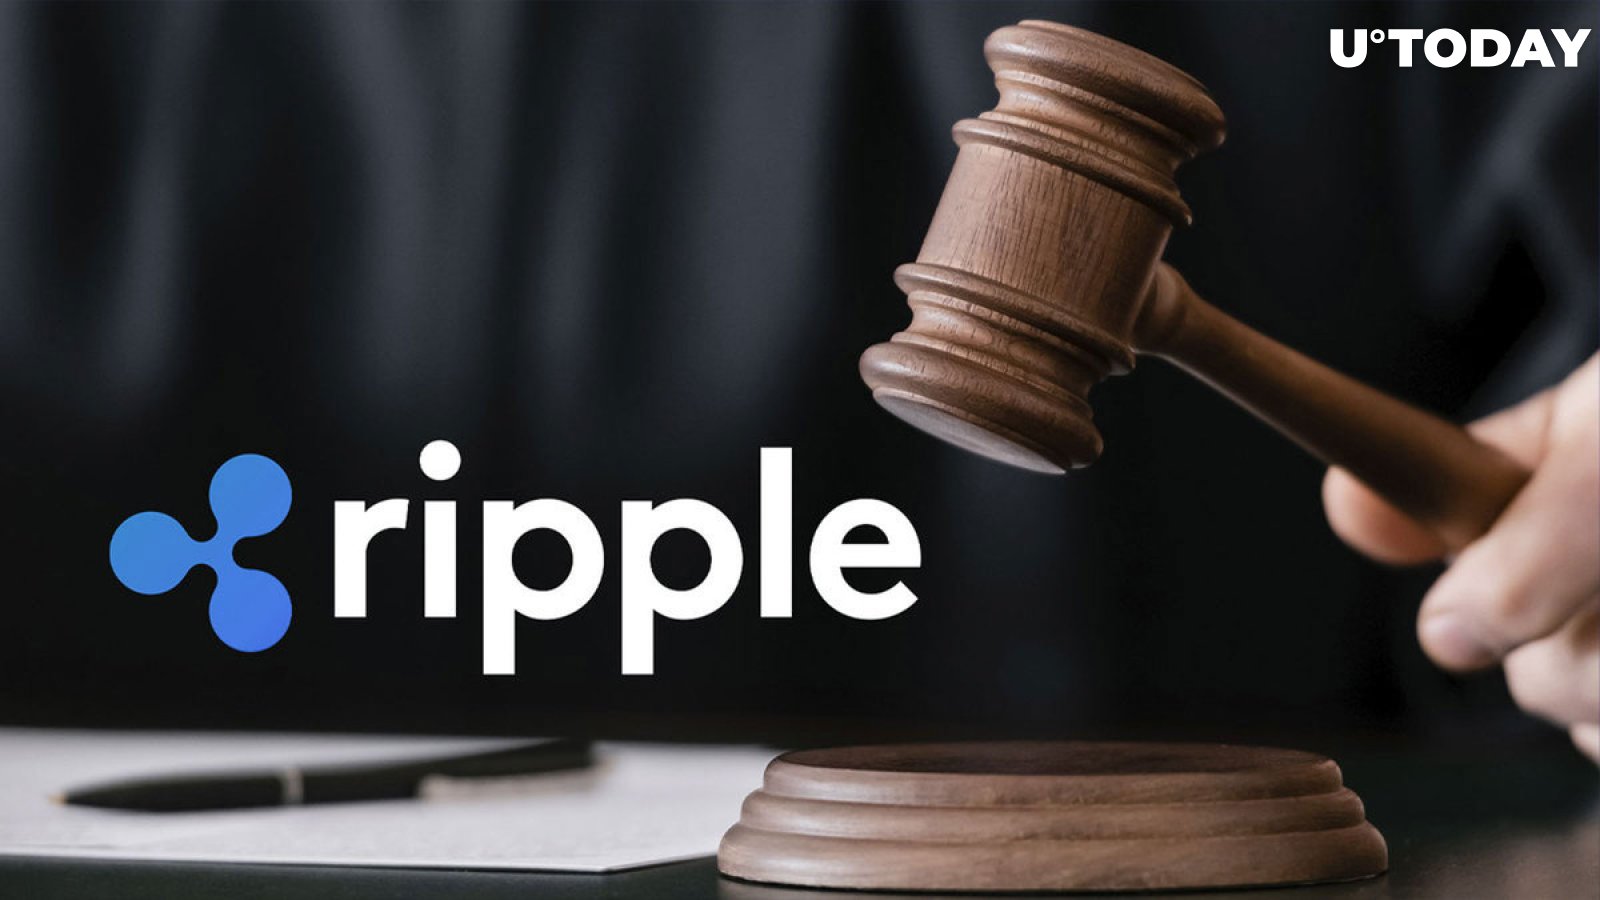 Ripple Lawsuit Ruling Looms, Here Are New Expectations in Wake of FTX Collapse